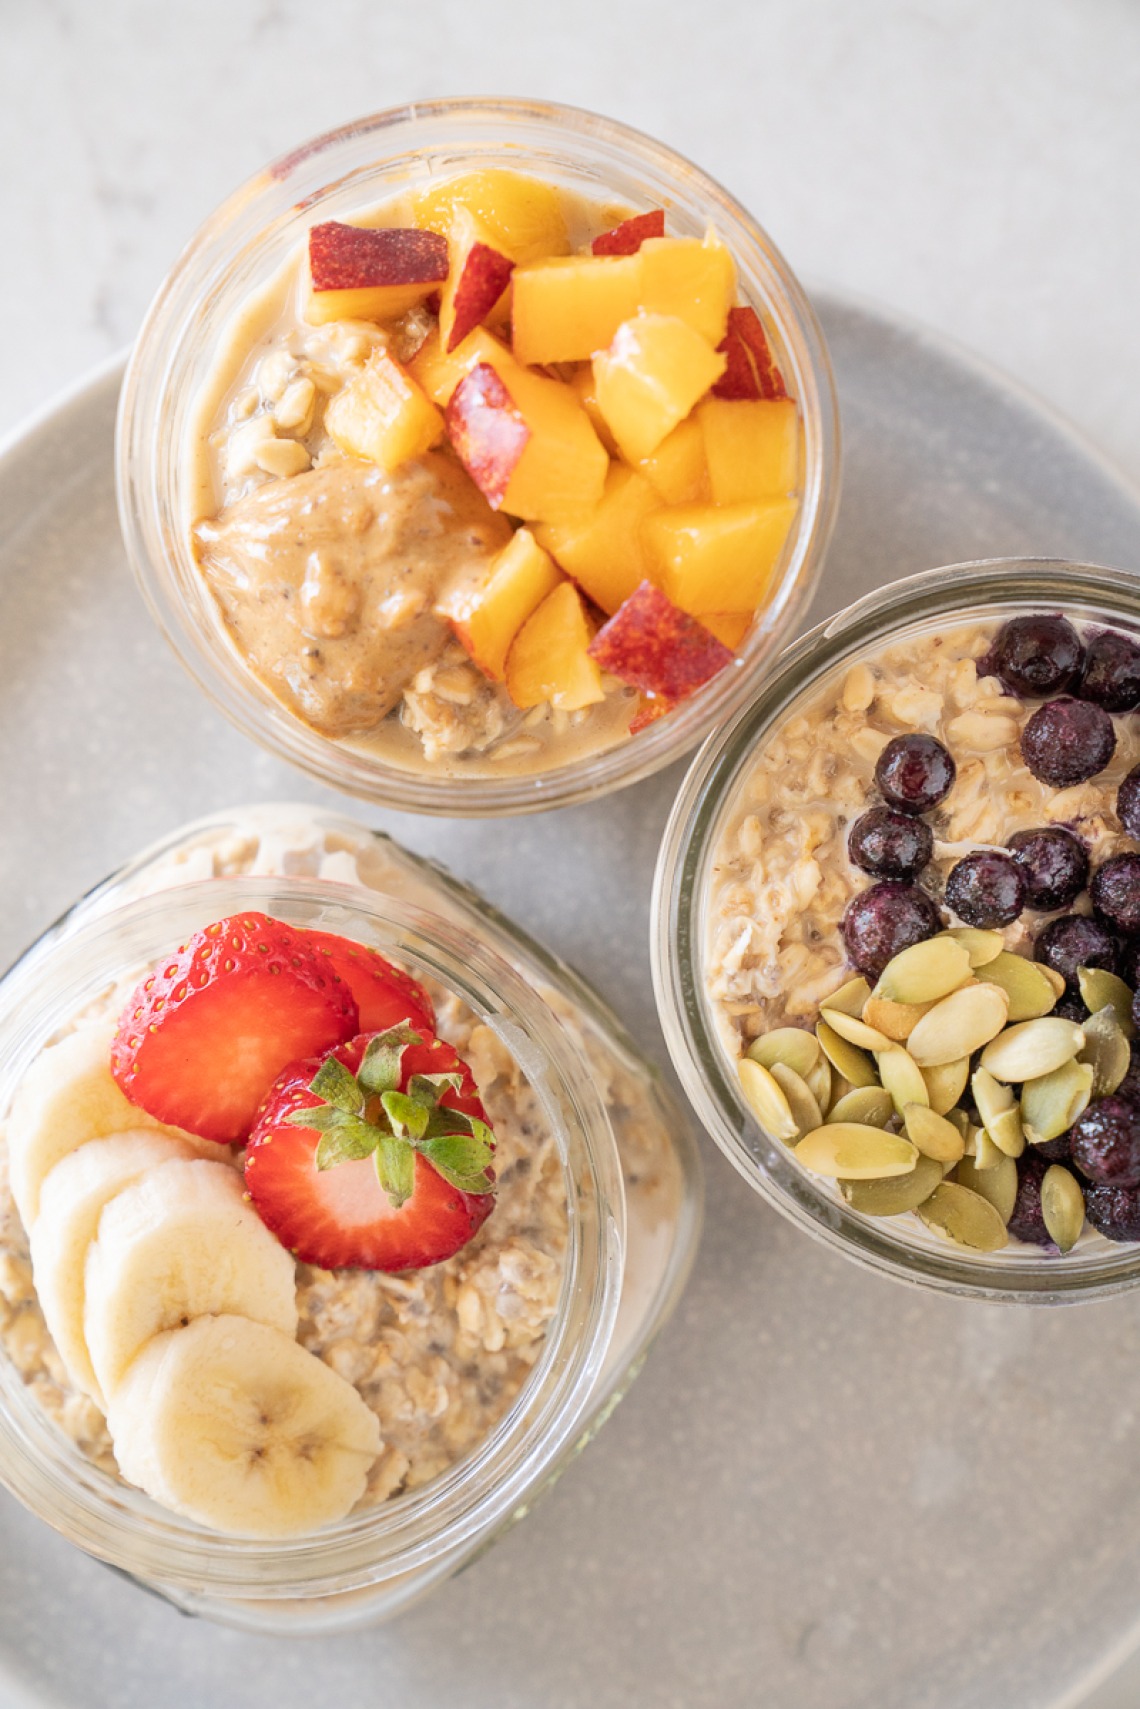 Overnight Oats in seperate jars with each different toppings: strawberries & bananas, Chocolate chips & nuts, Peaches & honey